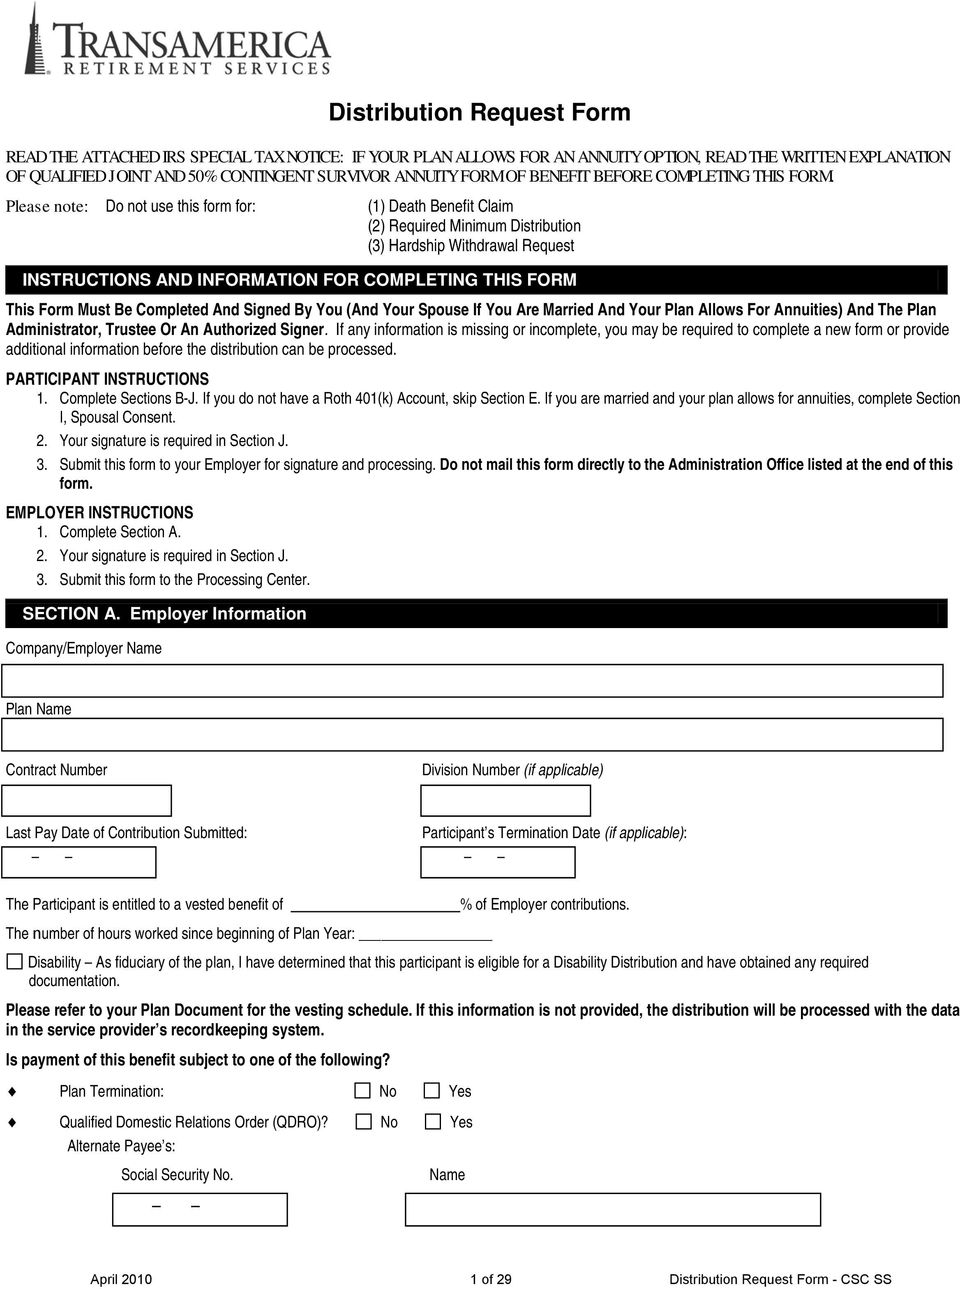 Please note: Do not use this form for: (1) Death Benefit Claim (2) Required Minimum Distribution (3) Hardship Withdrawal Request INSTRUCTIONS AND INFORMATION FOR COMPLETING THIS FORM This Form Must